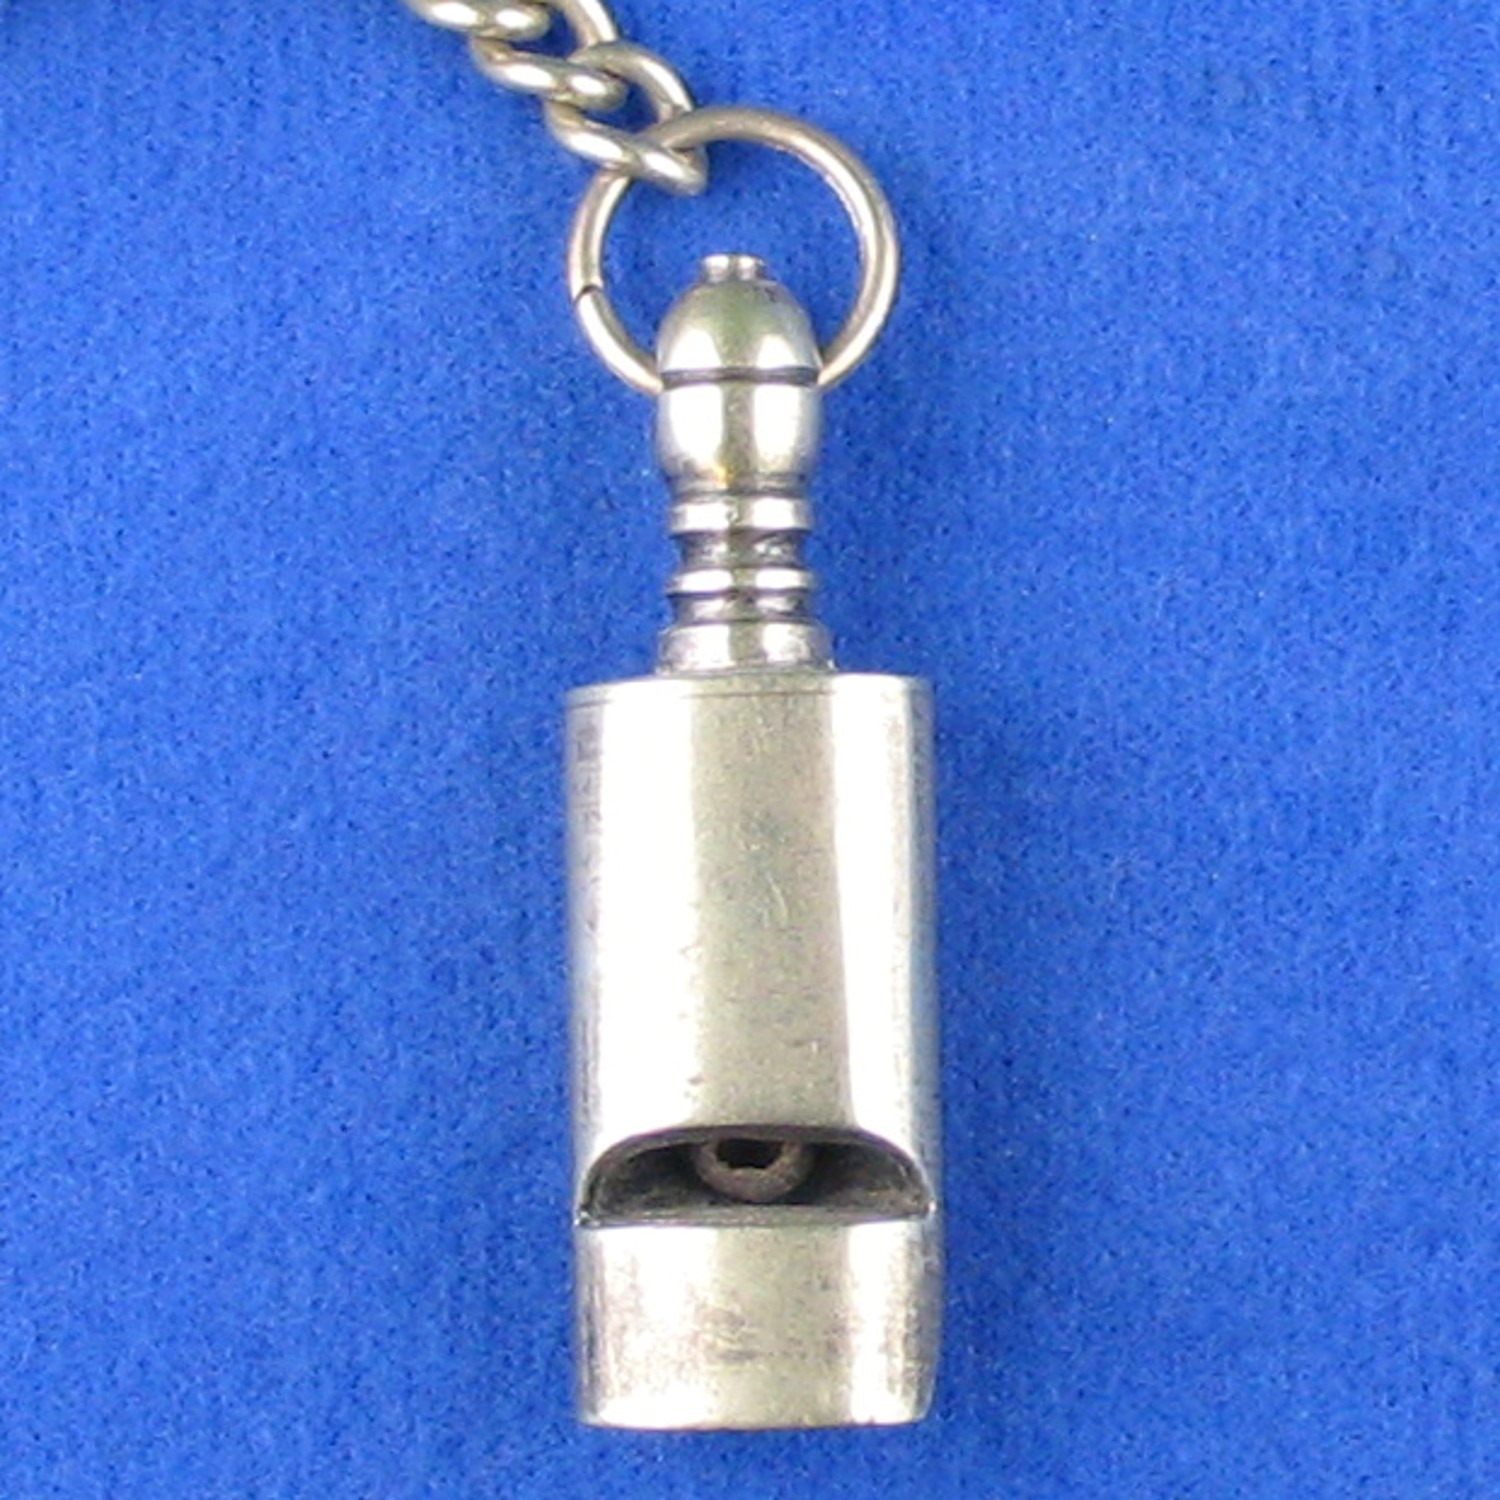 audd whistle to linegar